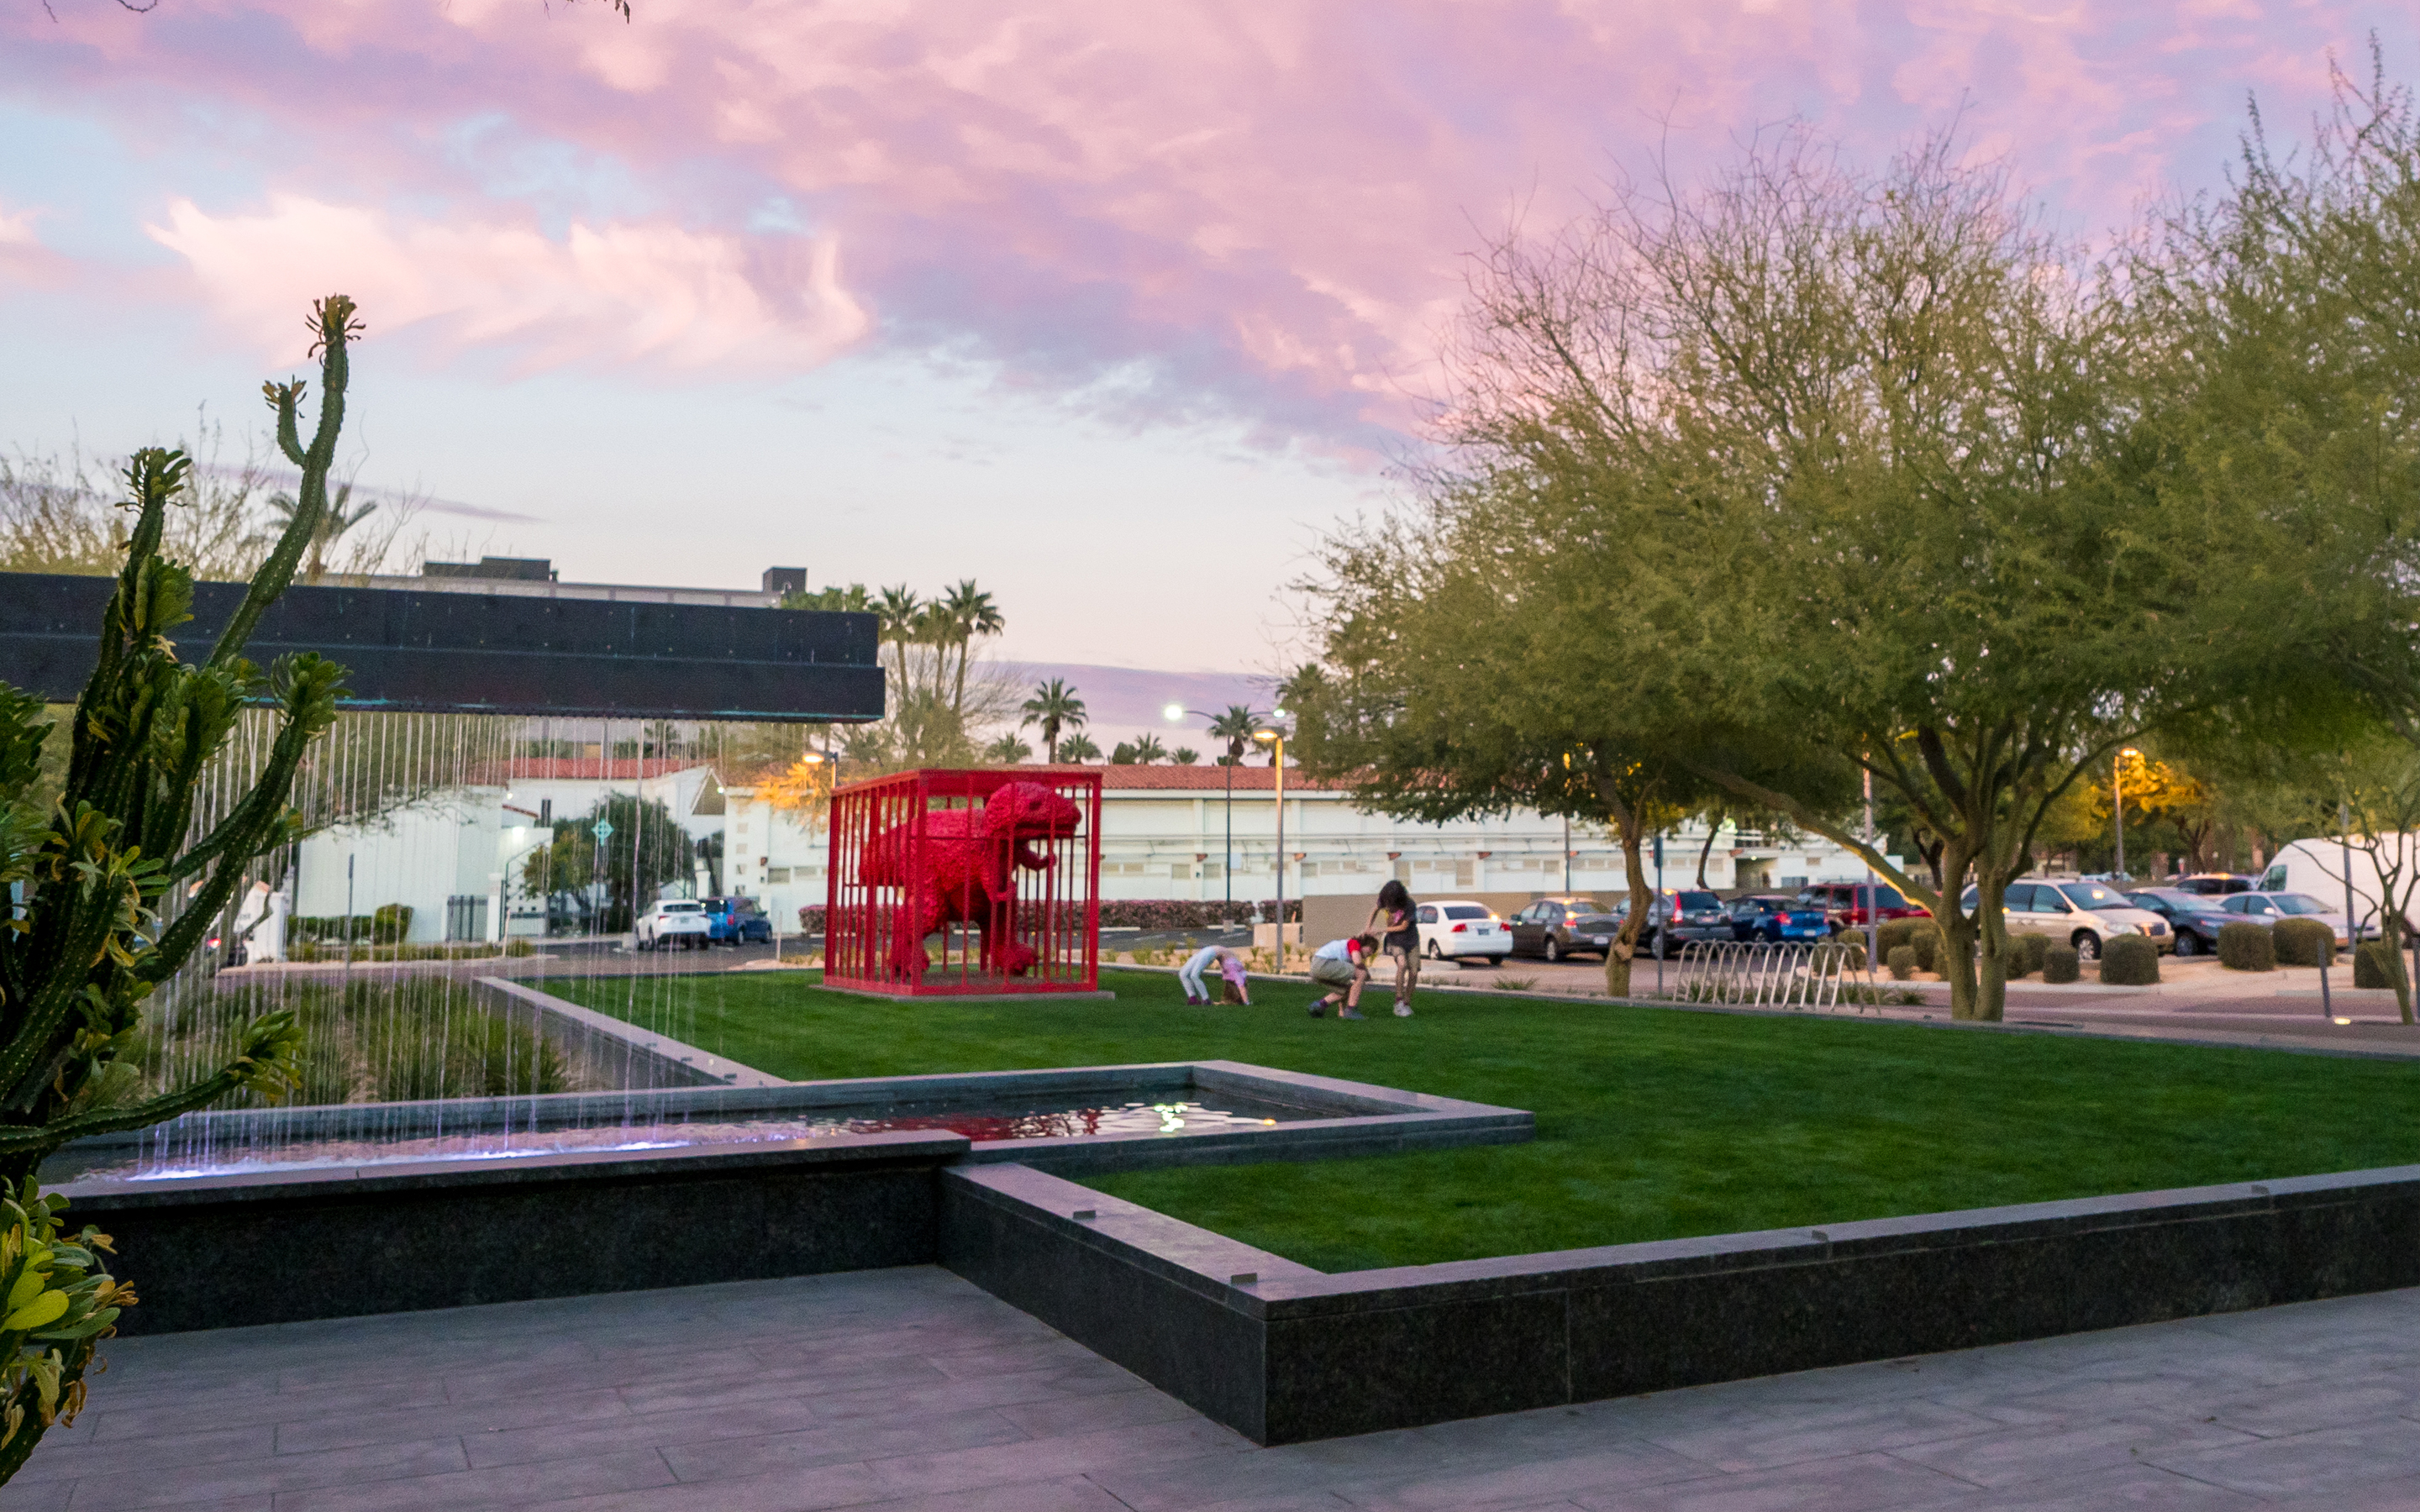 WITH A PLANNED GIFT TO PHOENIX ART MUSEUM, YOU ENSURE OUR COMMUNITY HAS ACCESS TO INSPIRING ART FOR GENERATIONS TO COME.